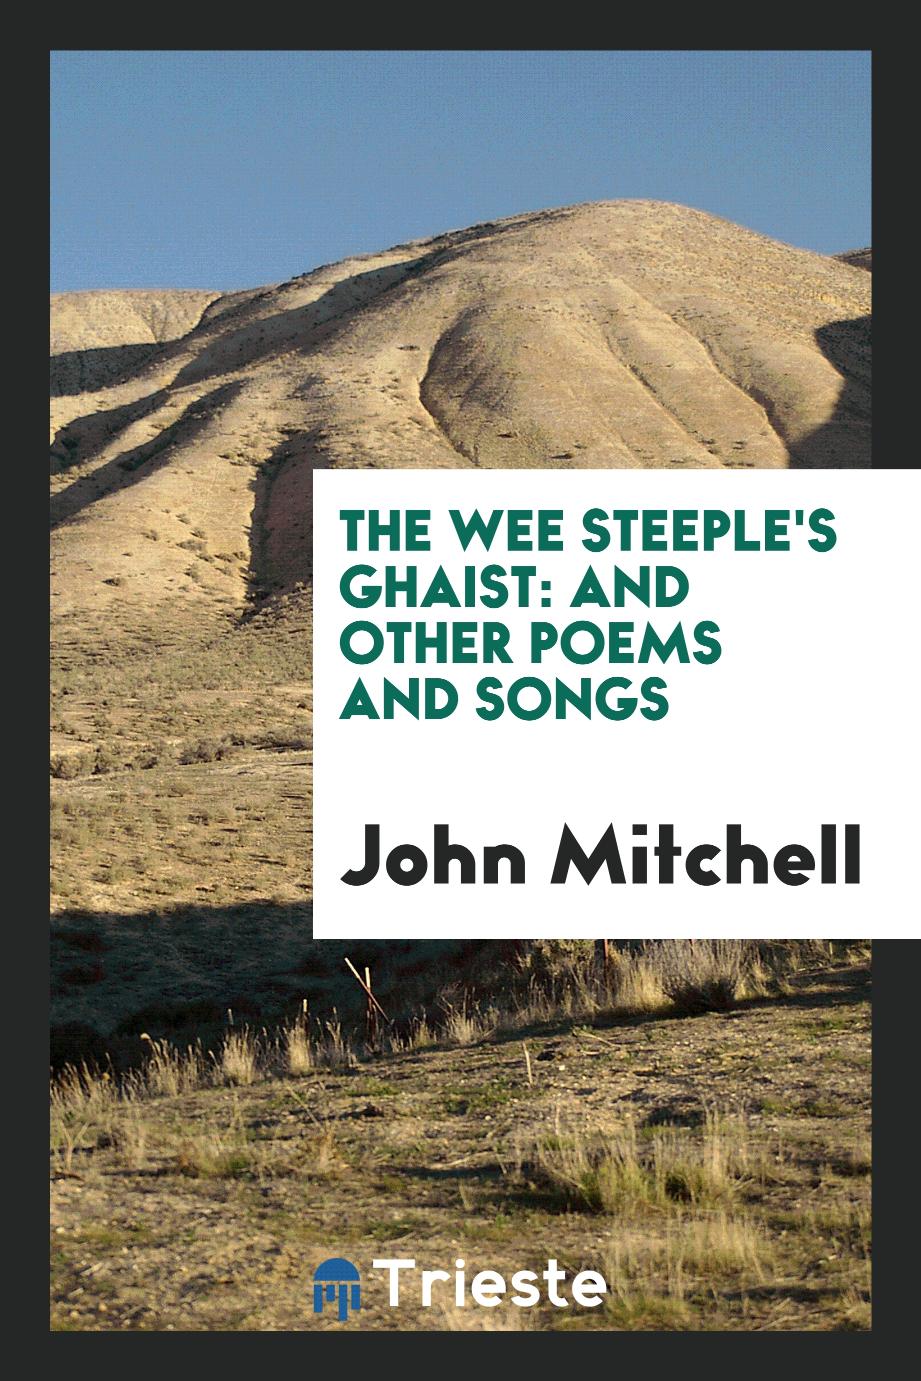 The wee steeple's ghaist: and other poems and songs